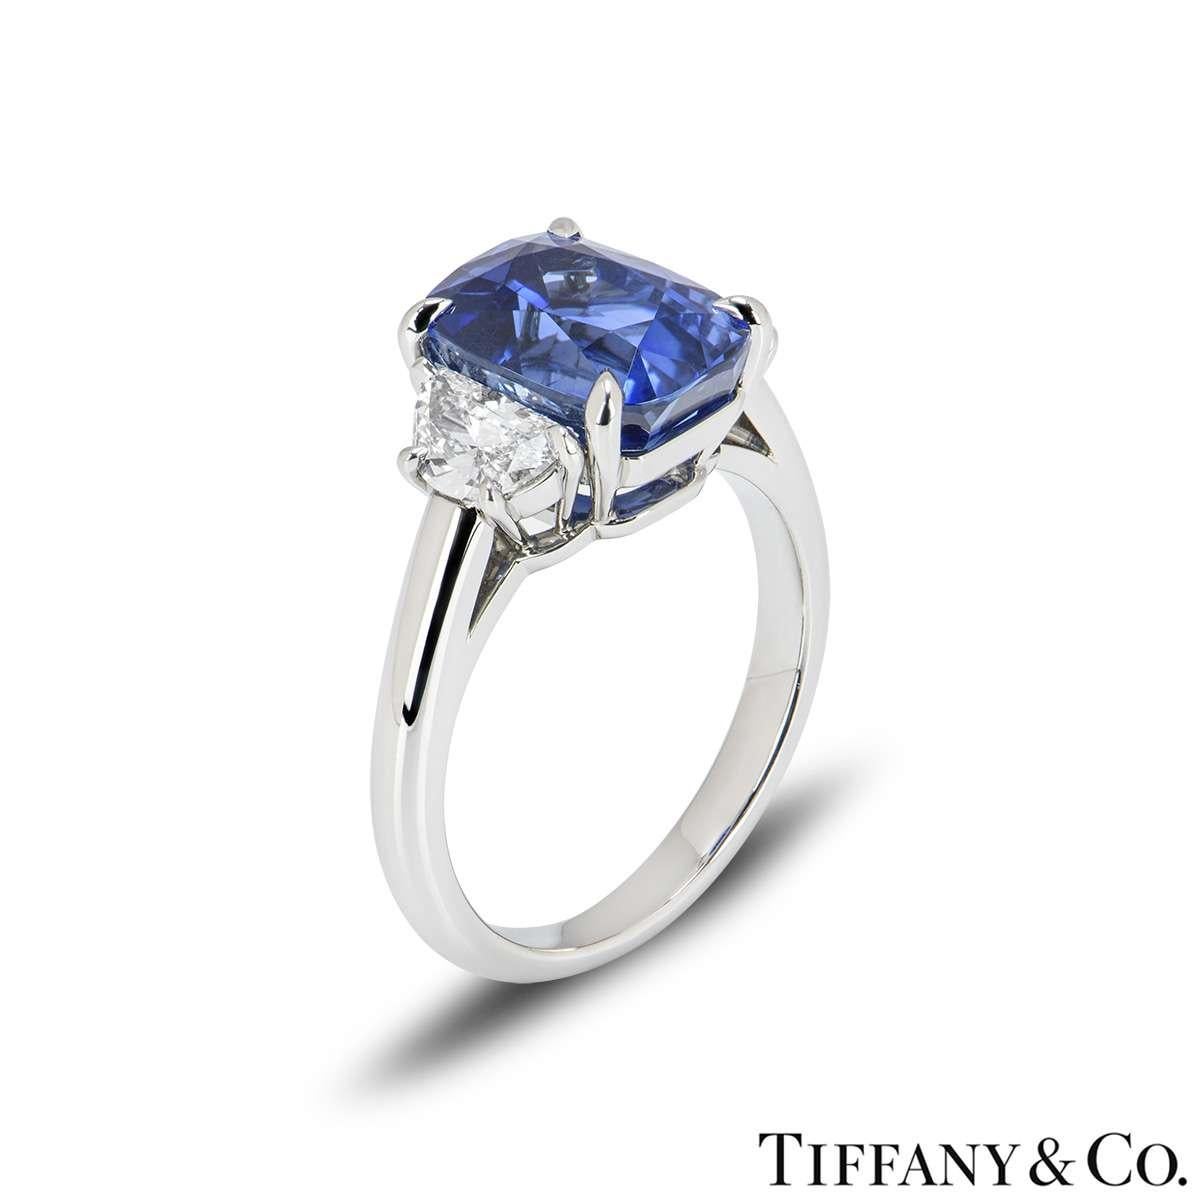 An exquisite sapphire and diamond ring by Tiffany & co. The ring is set to the centre with a cushion cut blue sapphire weighing 4.50ct, displaying a bright even hue. The sapphire is flanked by two half-moon cut diamonds totalling 0.58ct, E colour